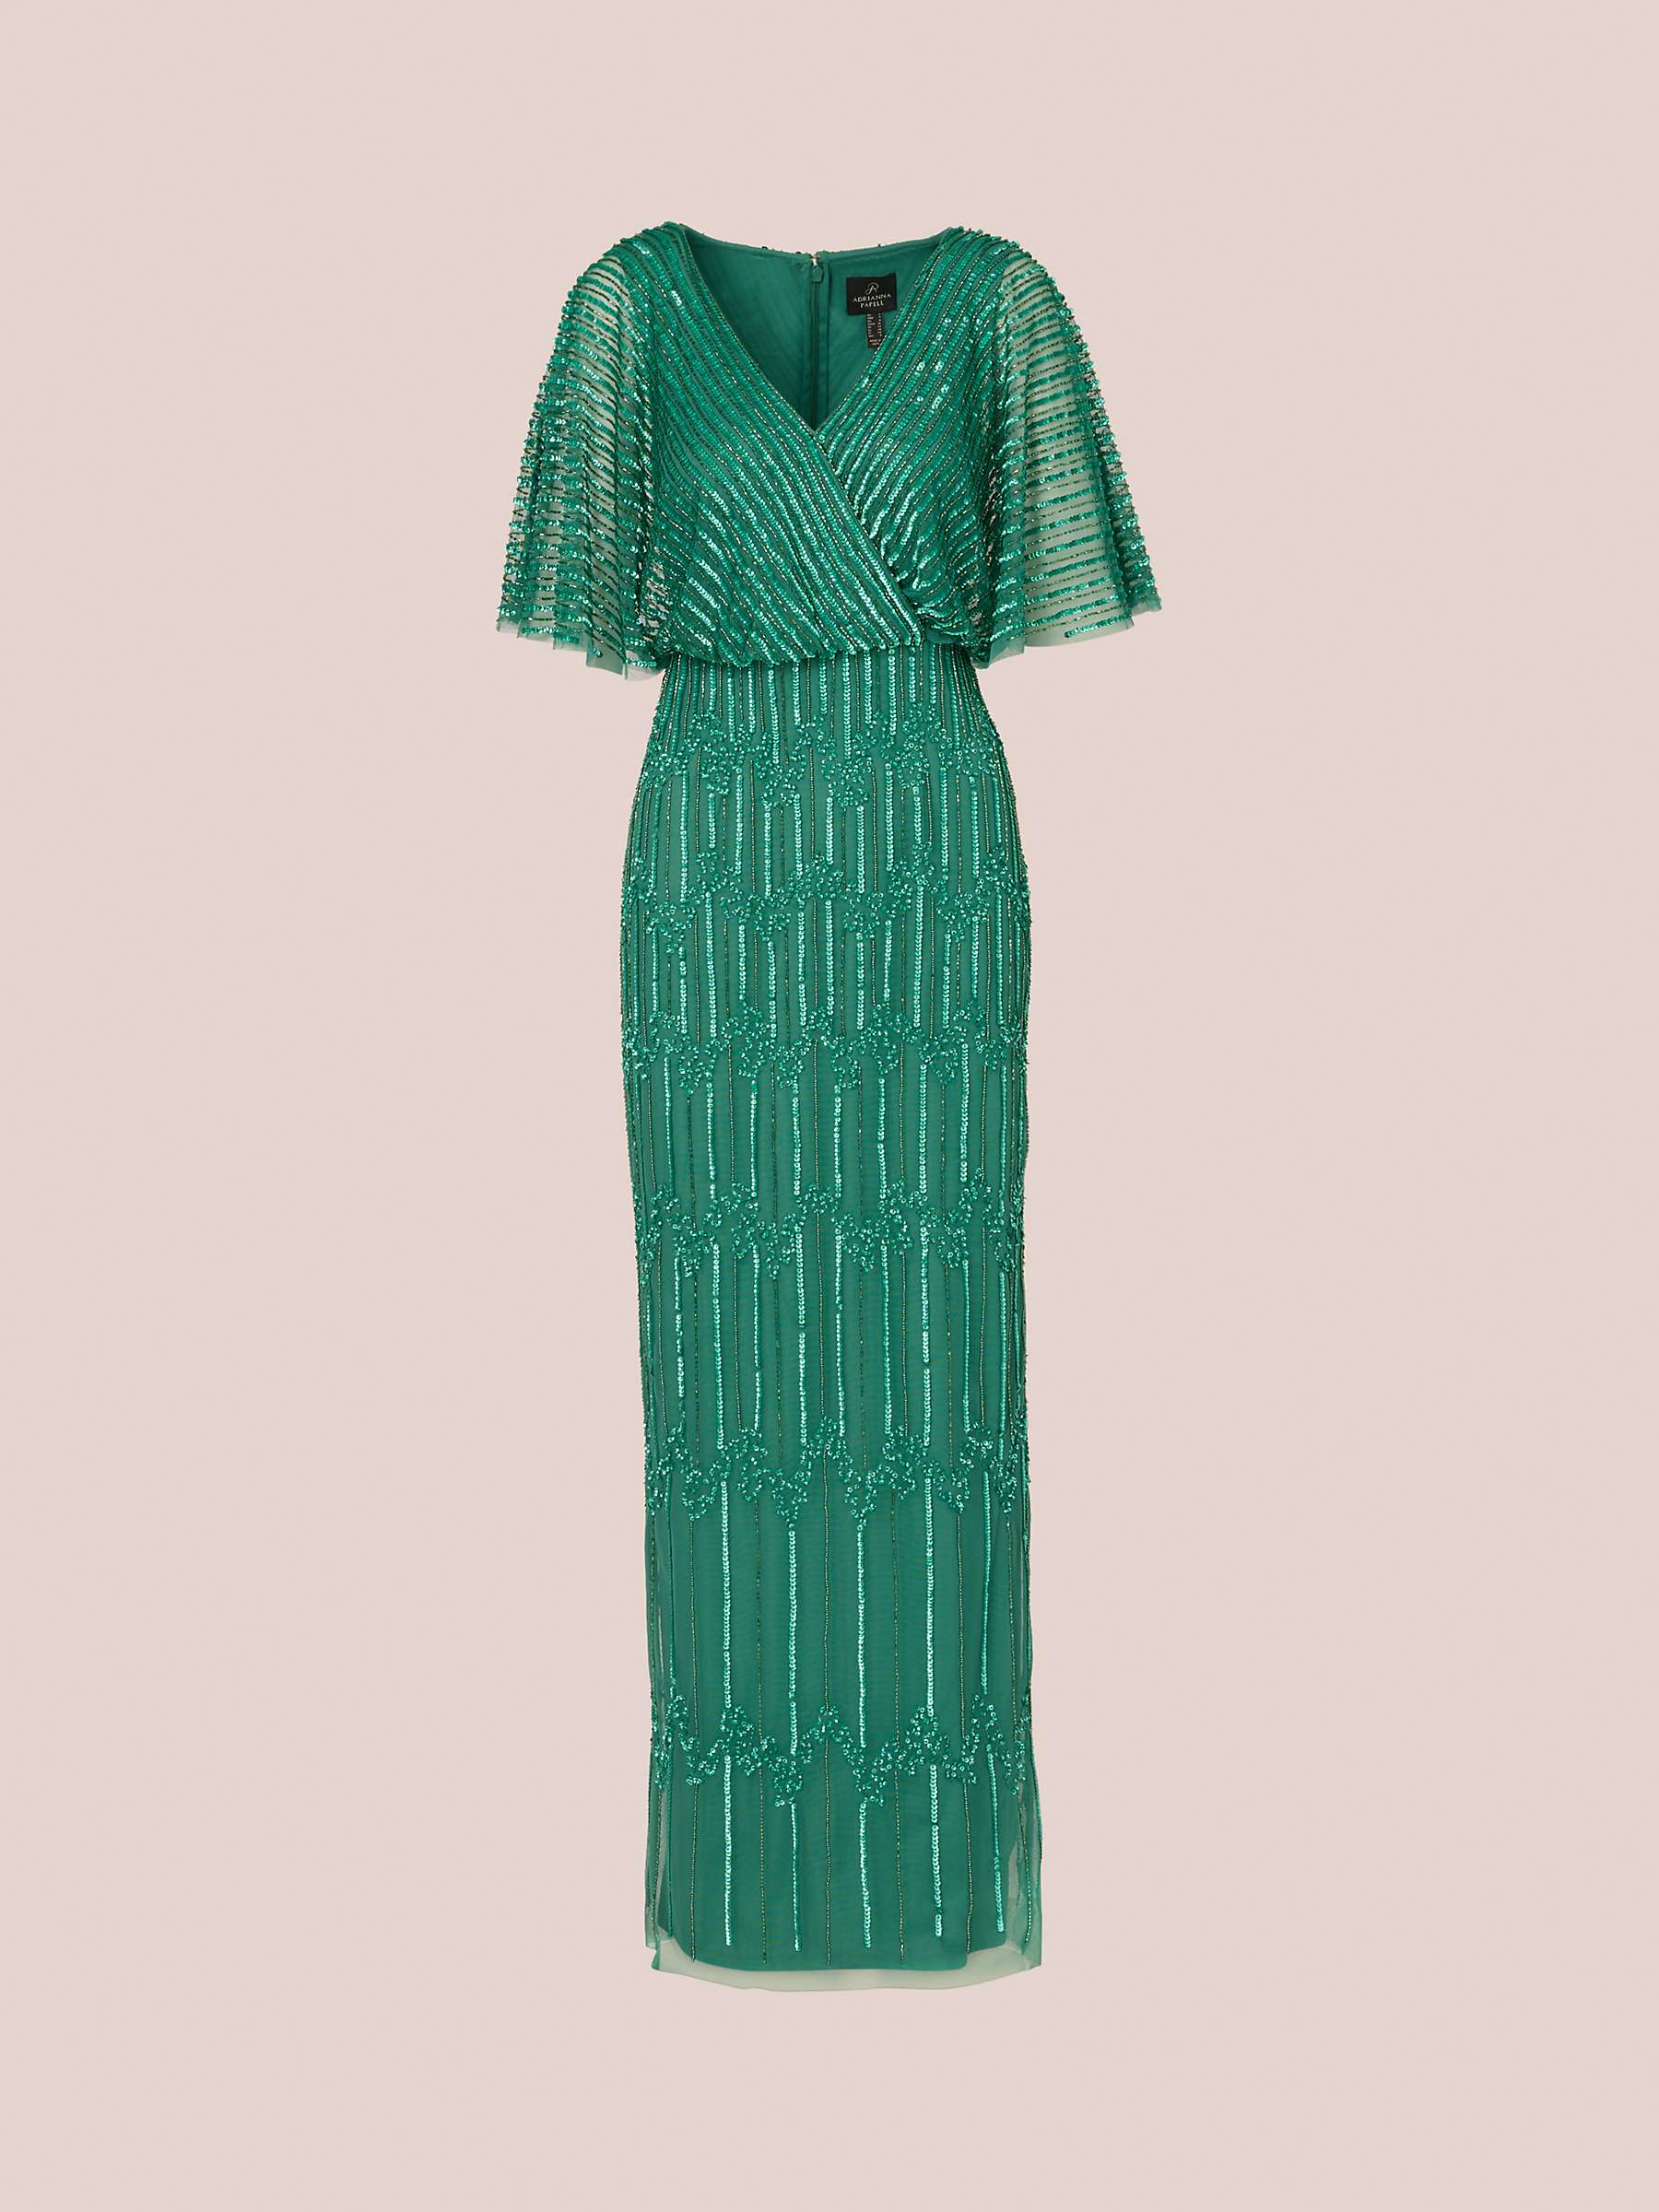 Buy Adrianna Papell Beaded Surplice Maxi Dress, Jungle Green Online at johnlewis.com